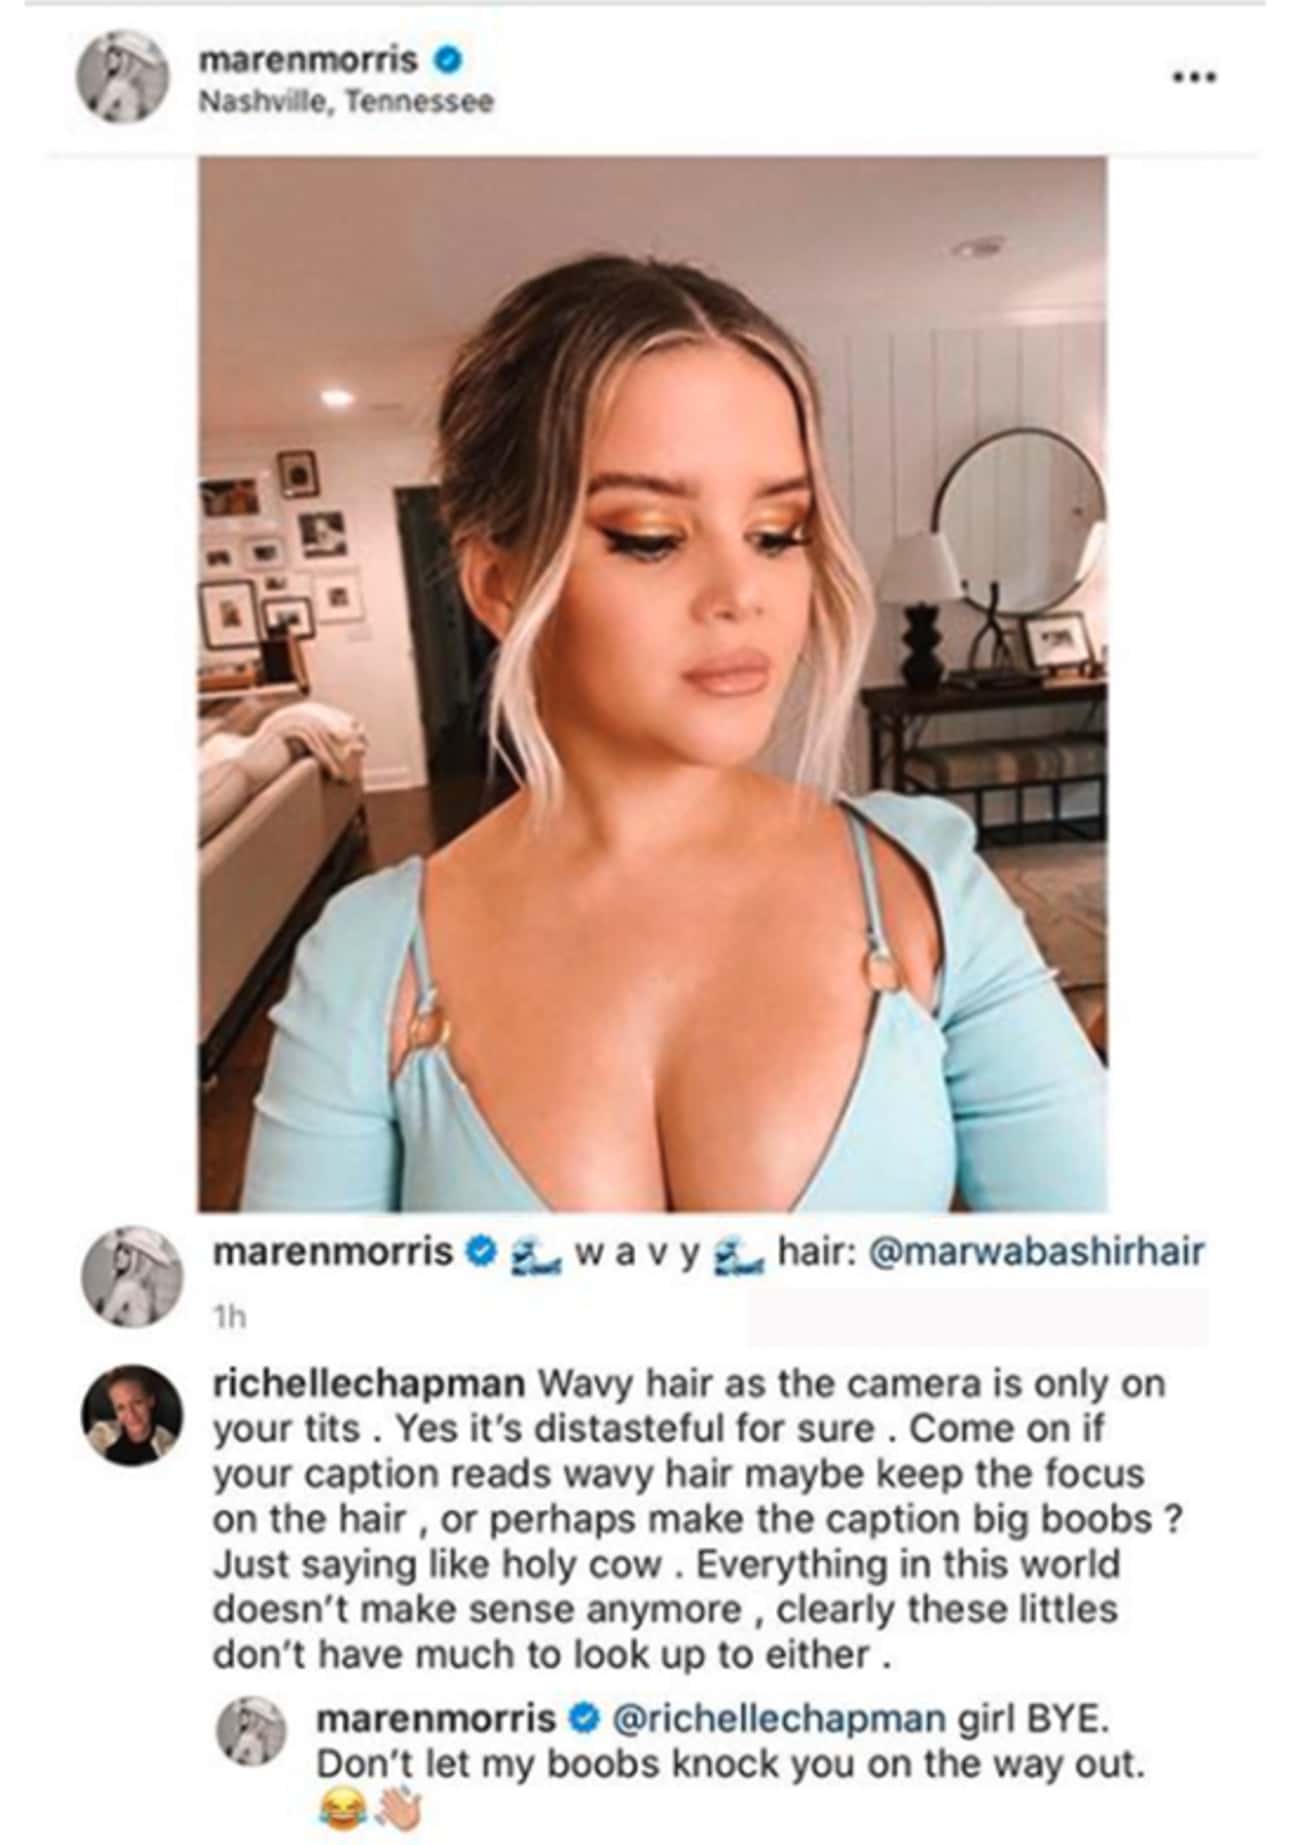 celebs savage replies - shoulder - marenmorris. Nashville, Tennessee marenmorris wavy hair 1h richellechapman Wavy hair as the camera is only on your tits. Yes it's distasteful for sure. Come on if your caption reads wavy hair maybe keep the focus on the 